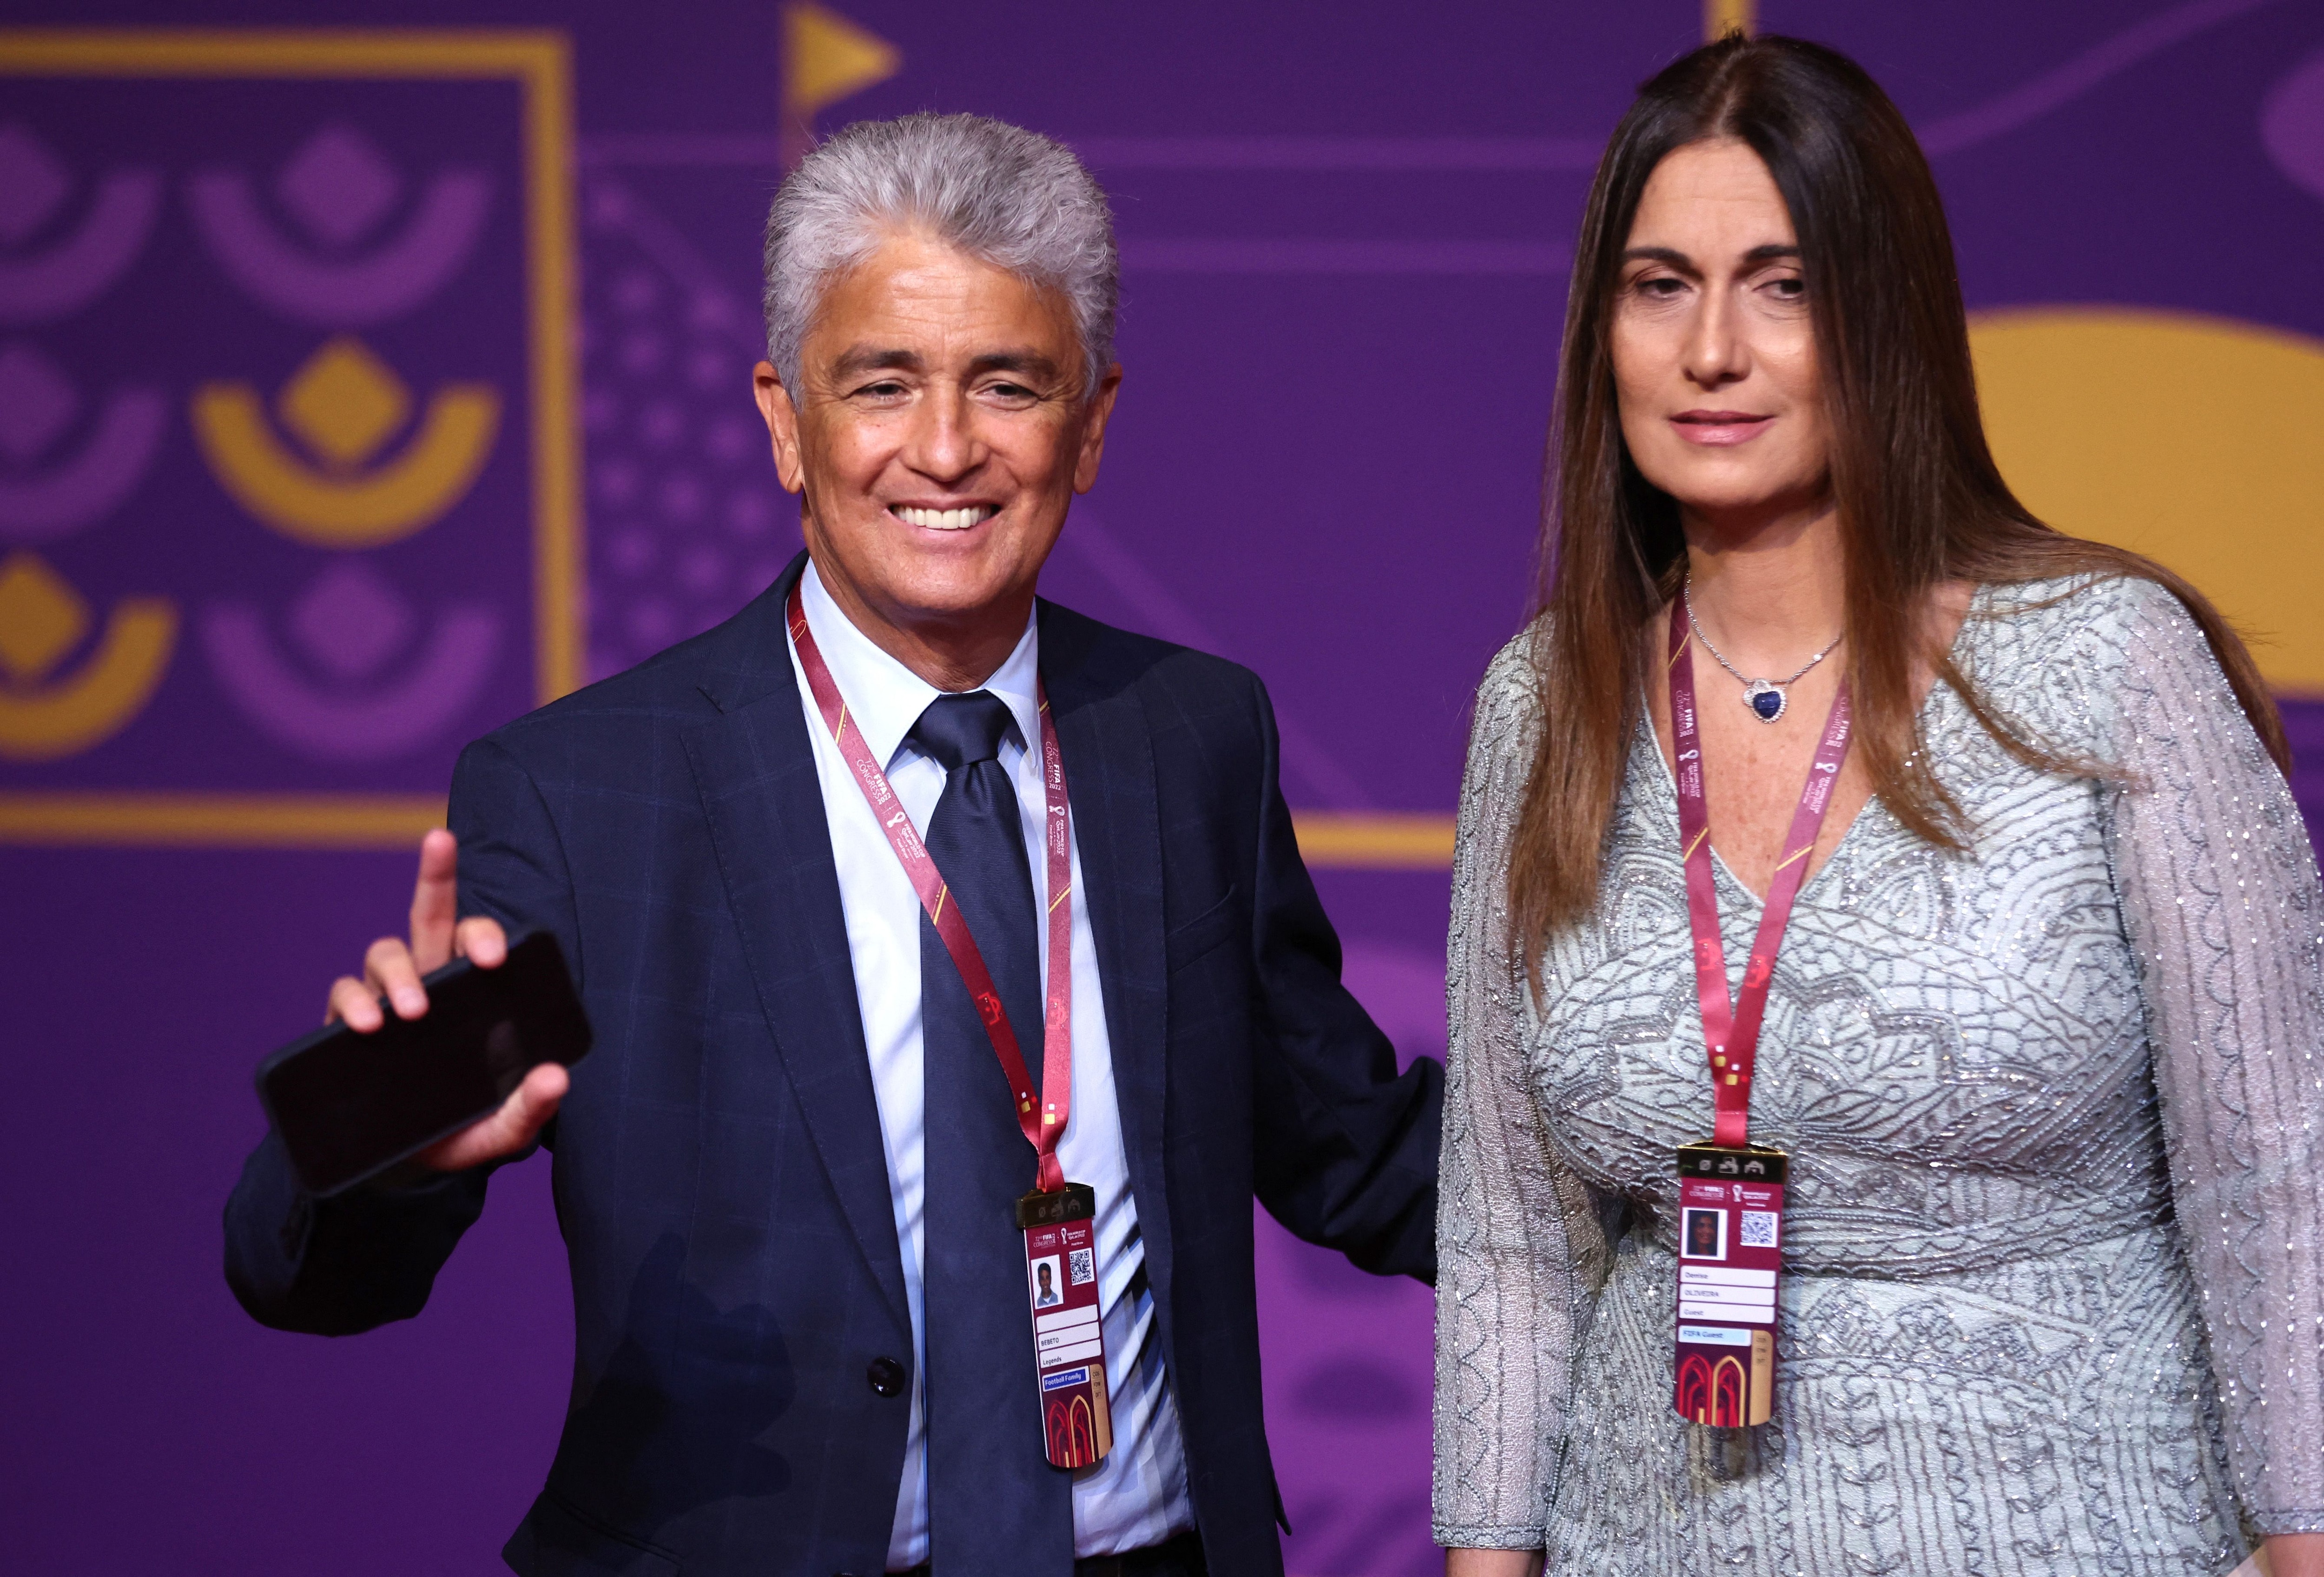 Soccer Football - World Cup - Final Draw - Doha Exhibition & Convention Center, Doha, Qatar - April 1, 2022 Former player Bebeto and his wife Denise de Oliveira arrive ahead of the draw REUTERS/Carl Recine